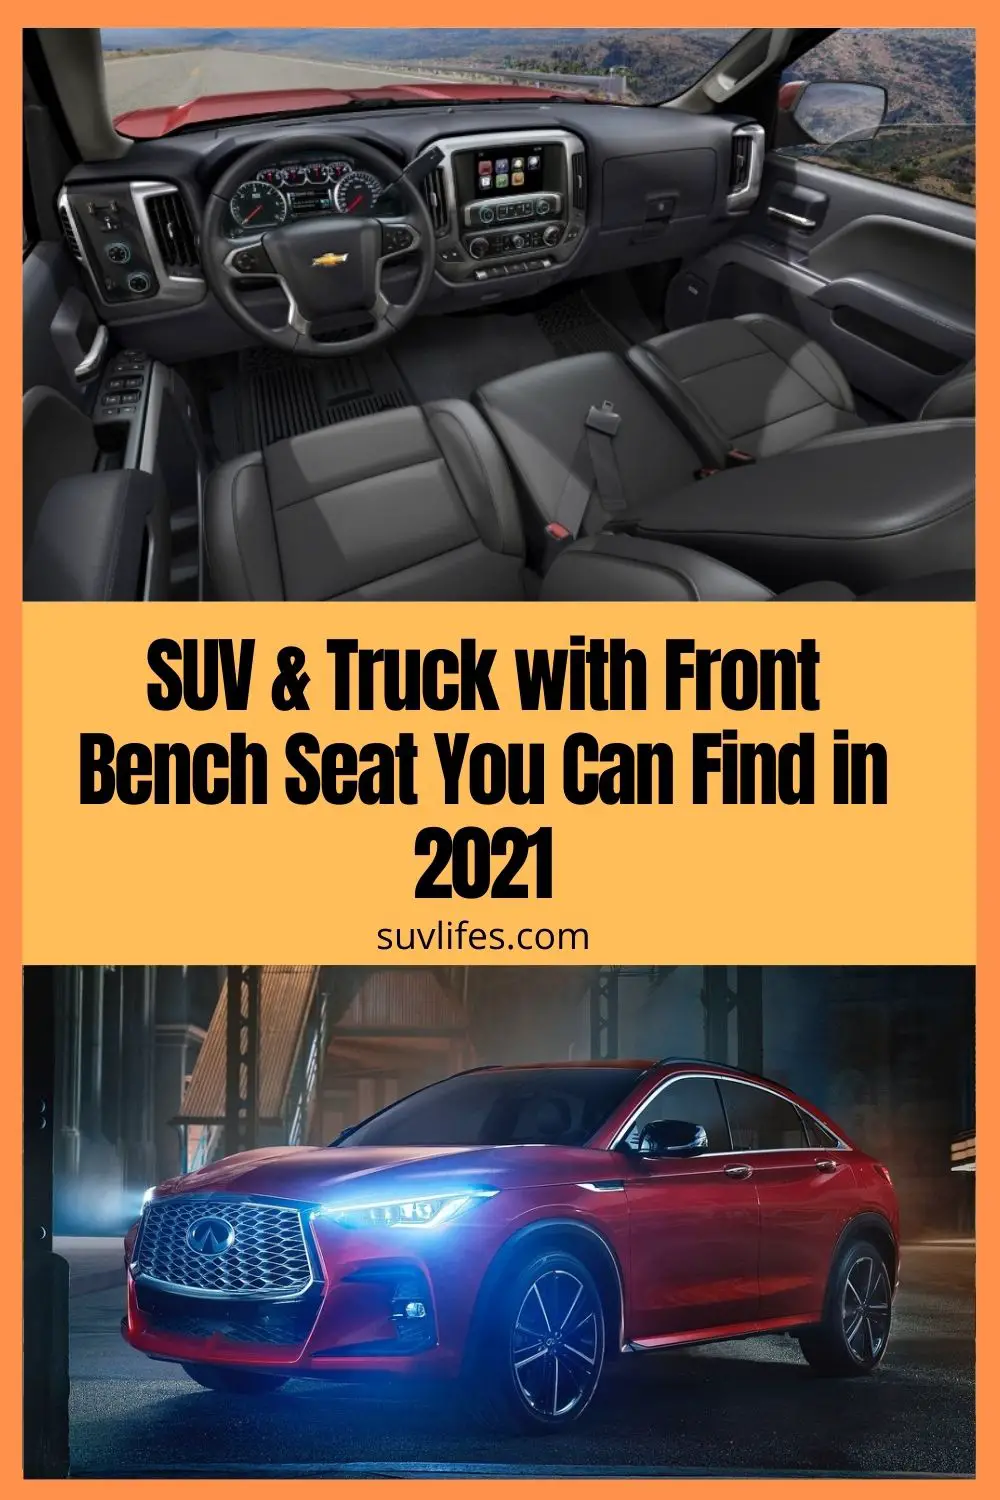 SUV With Front bench Seat You Can Find Today